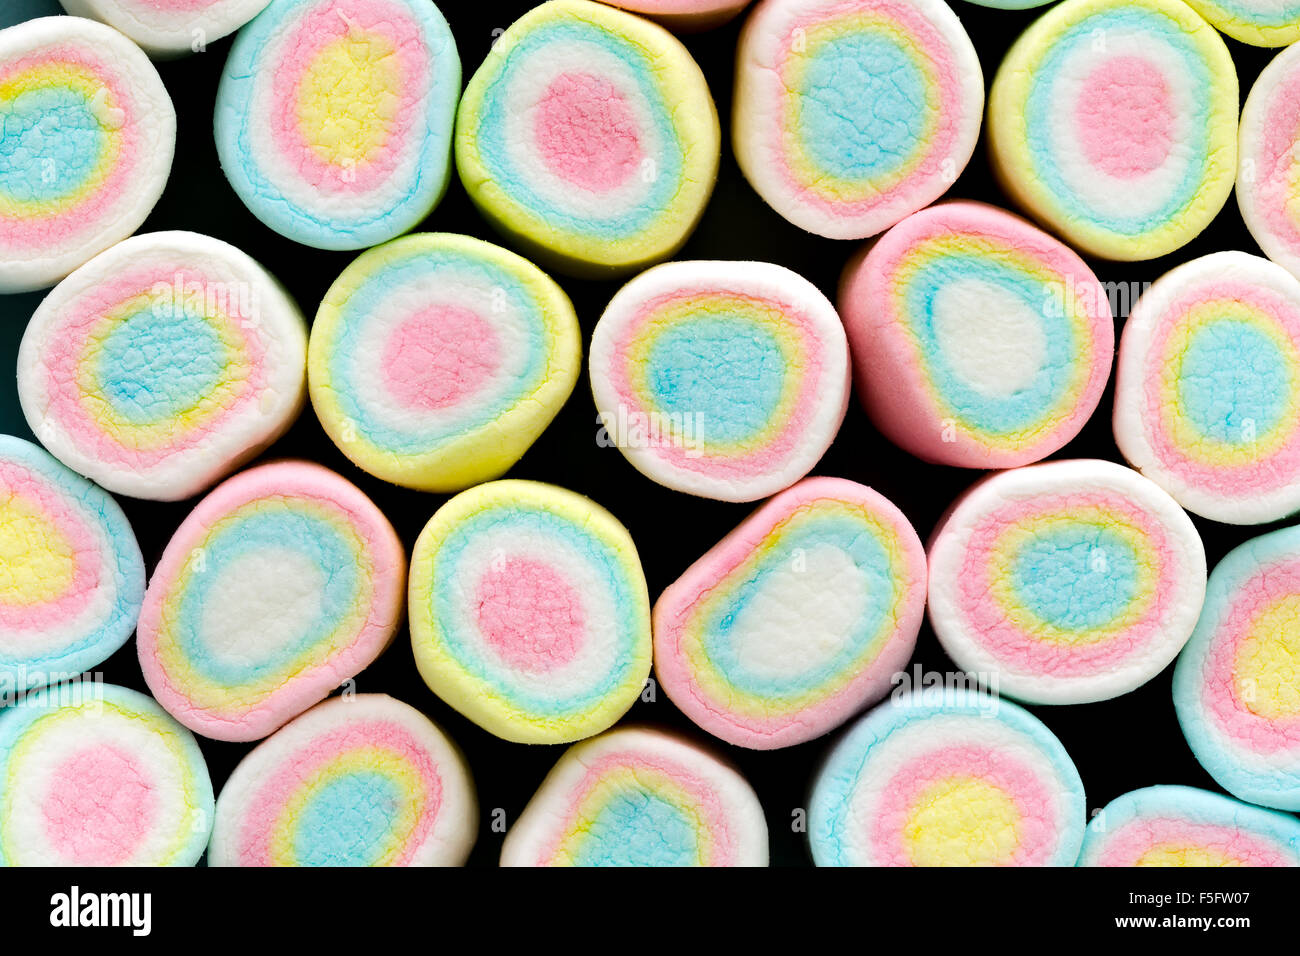 Group of colorful marshmallows dessert or snack. Stock Photo